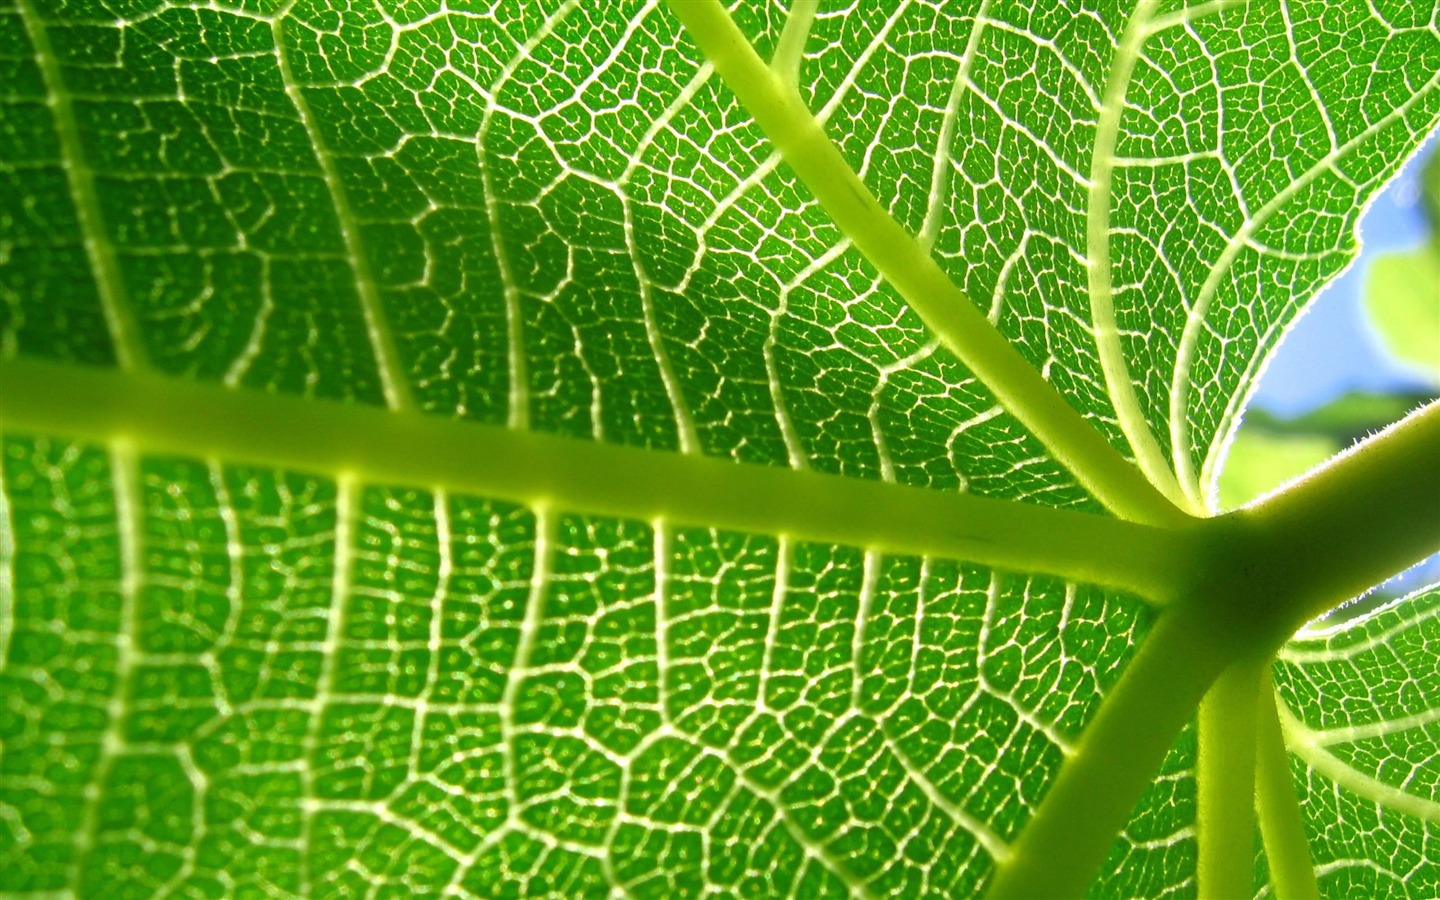 Large green leaves close-up flower wallpaper (2) #13 - 1440x900